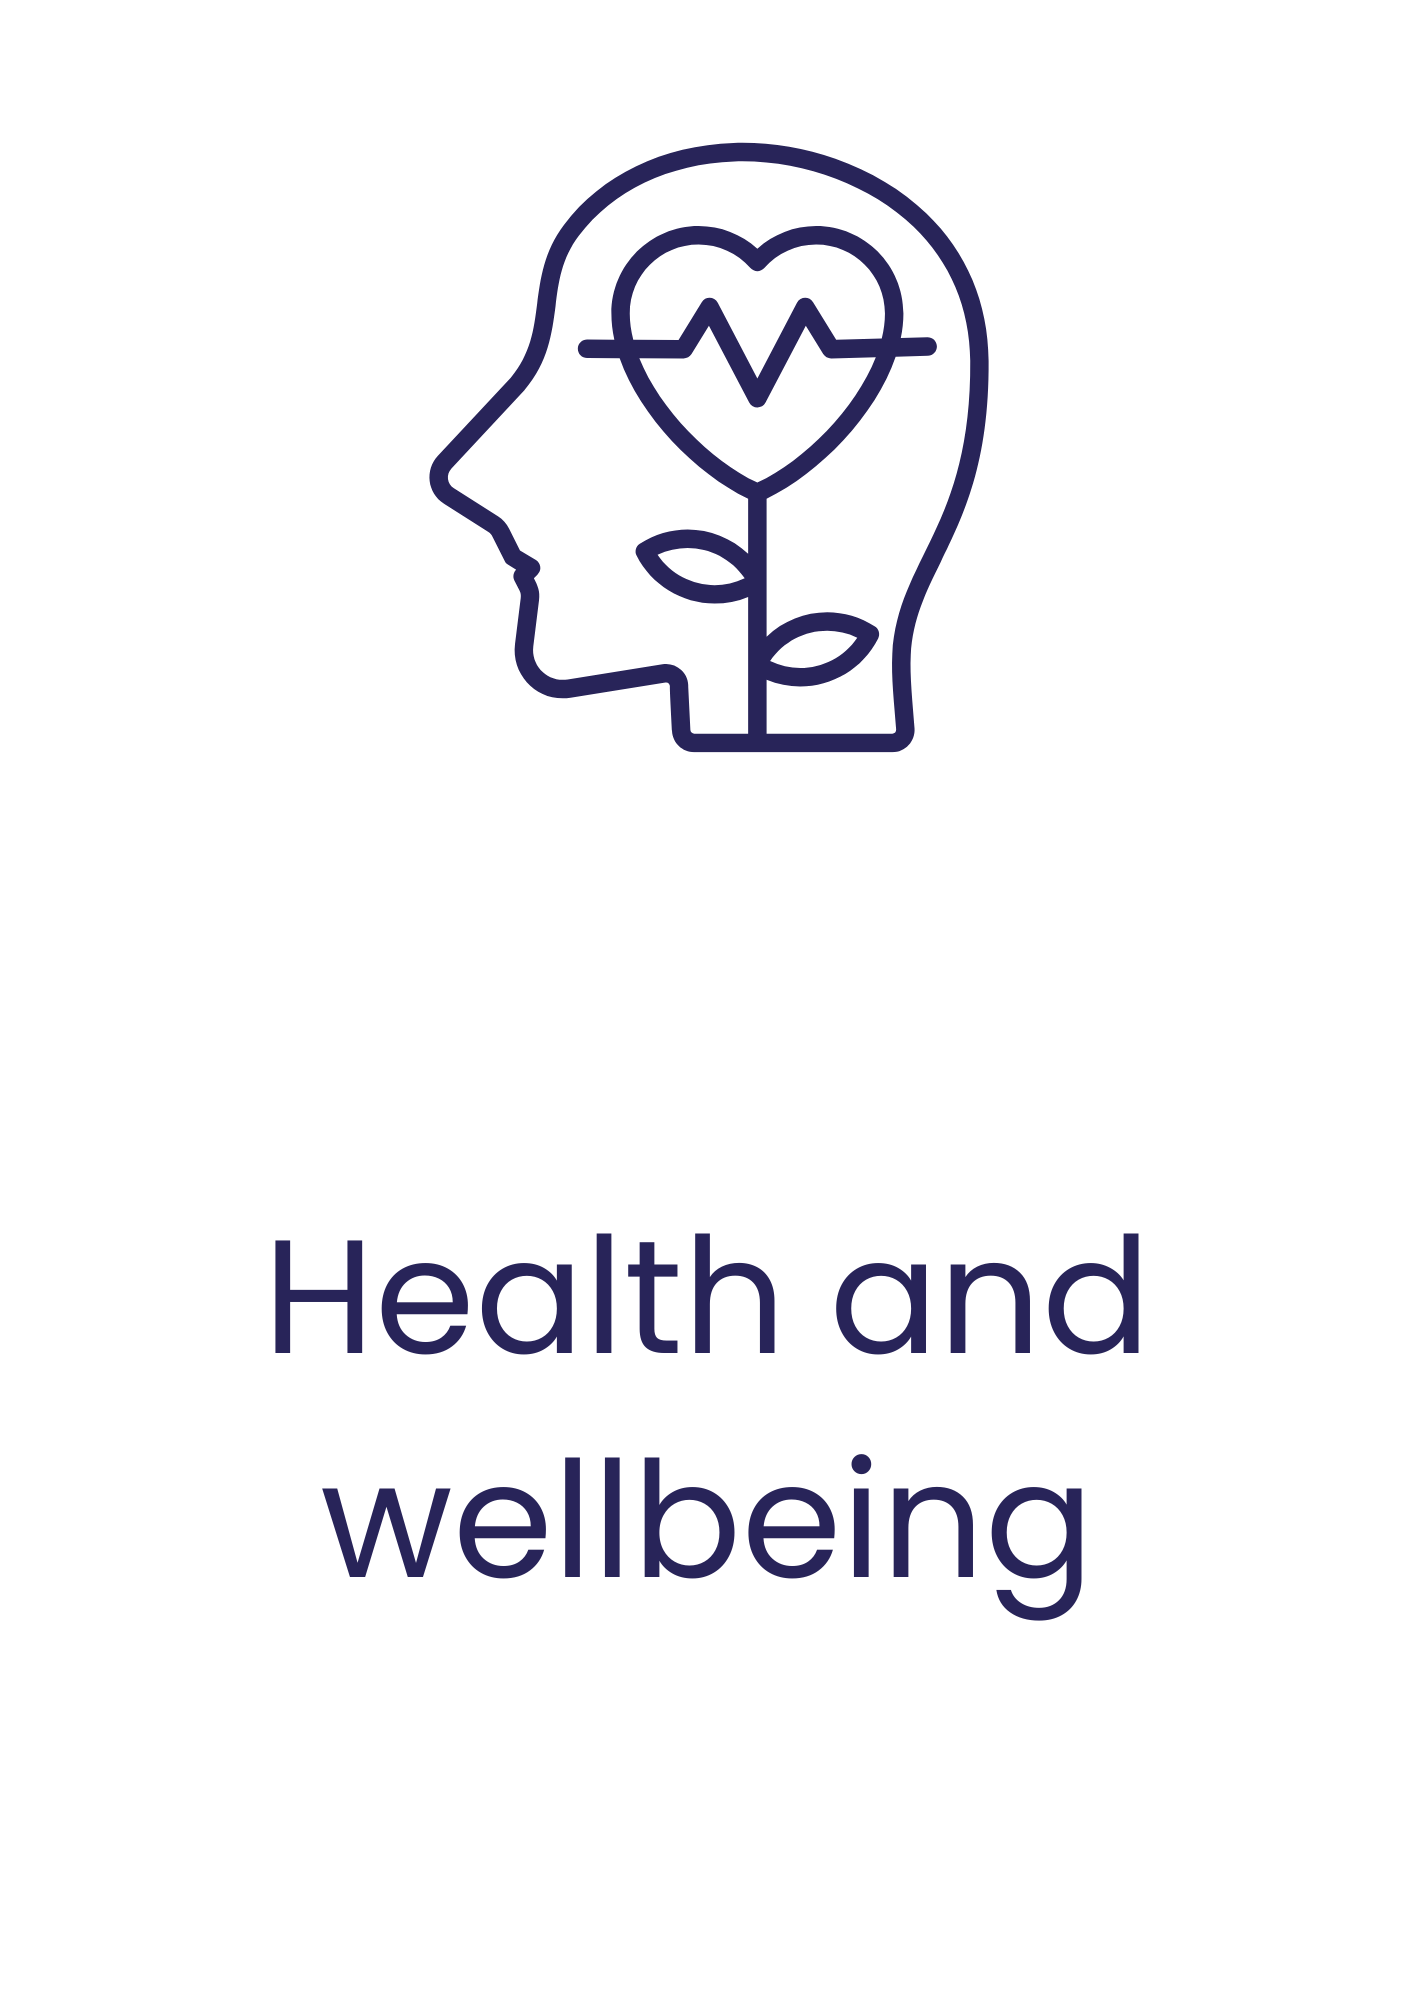 Health and wellbeing funding